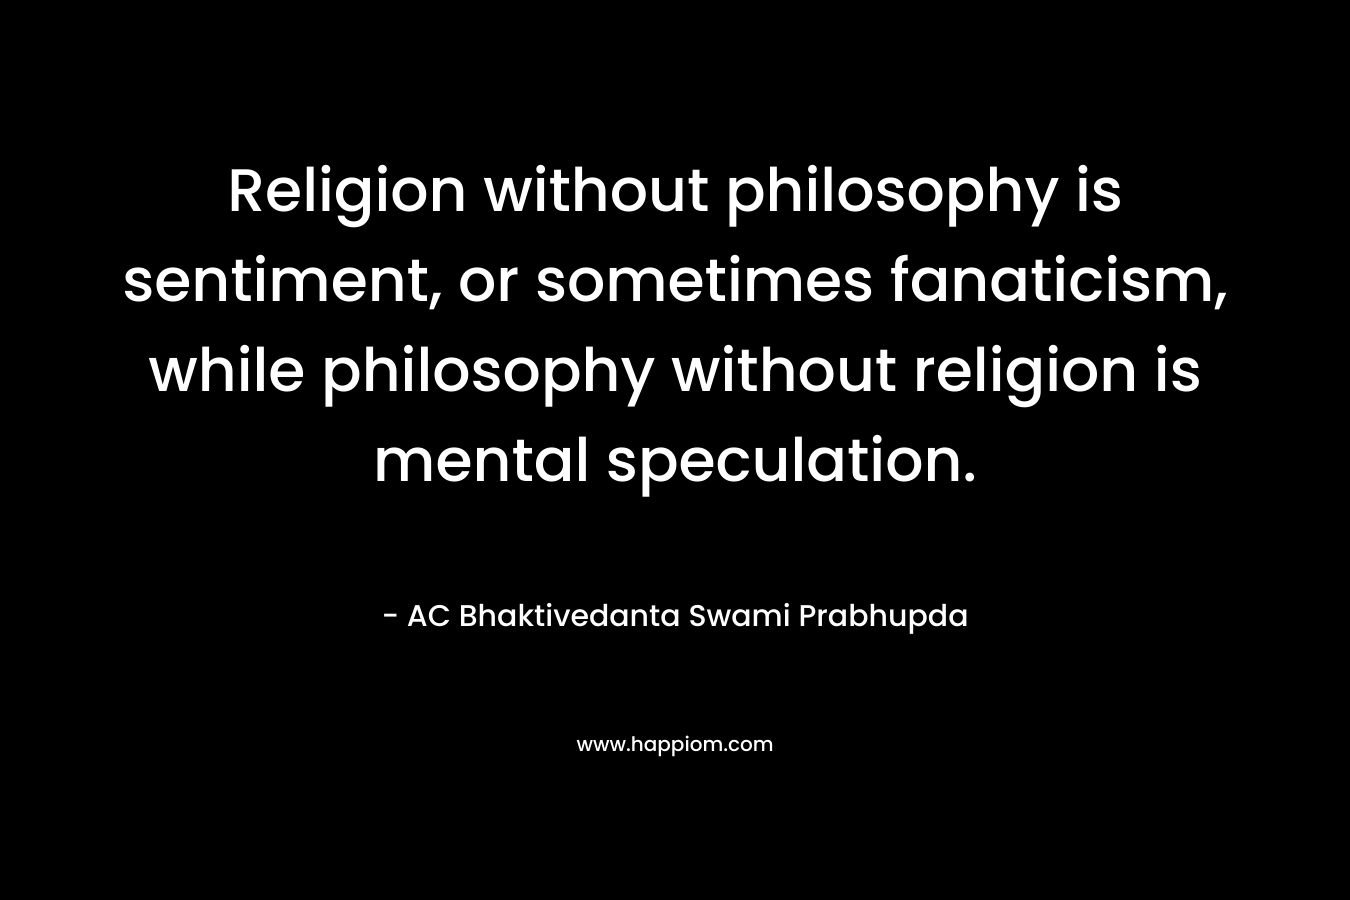 Religion without philosophy is sentiment, or sometimes fanaticism, while philosophy without religion is mental speculation. – AC Bhaktivedanta Swami Prabhupda